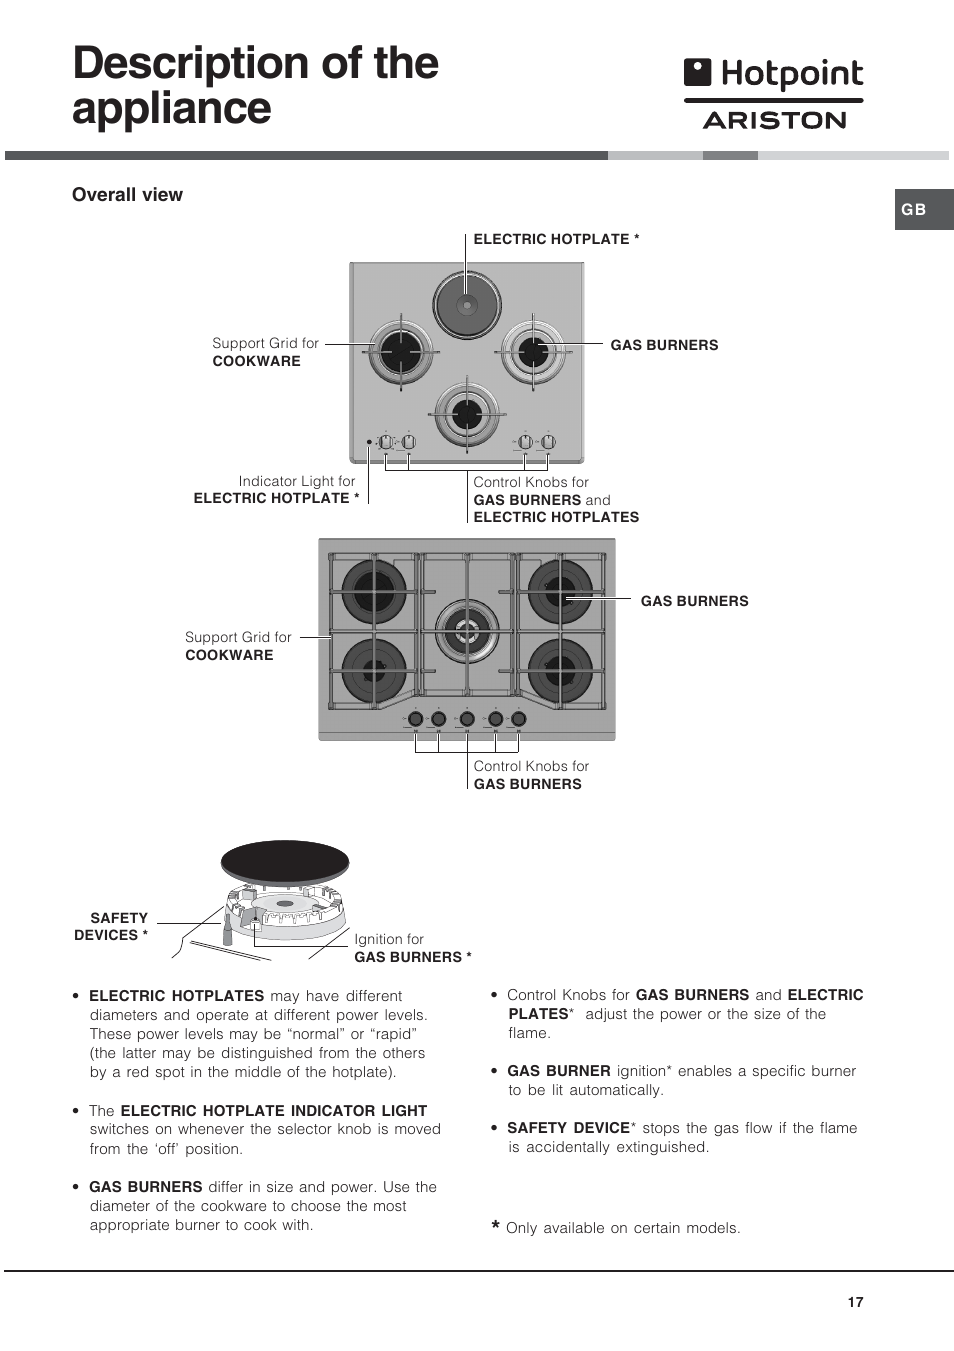 Description of the appliance | Hotpoint Ariston TD 640 S (ICE) IX-HA User Manual | Page 17 / 56